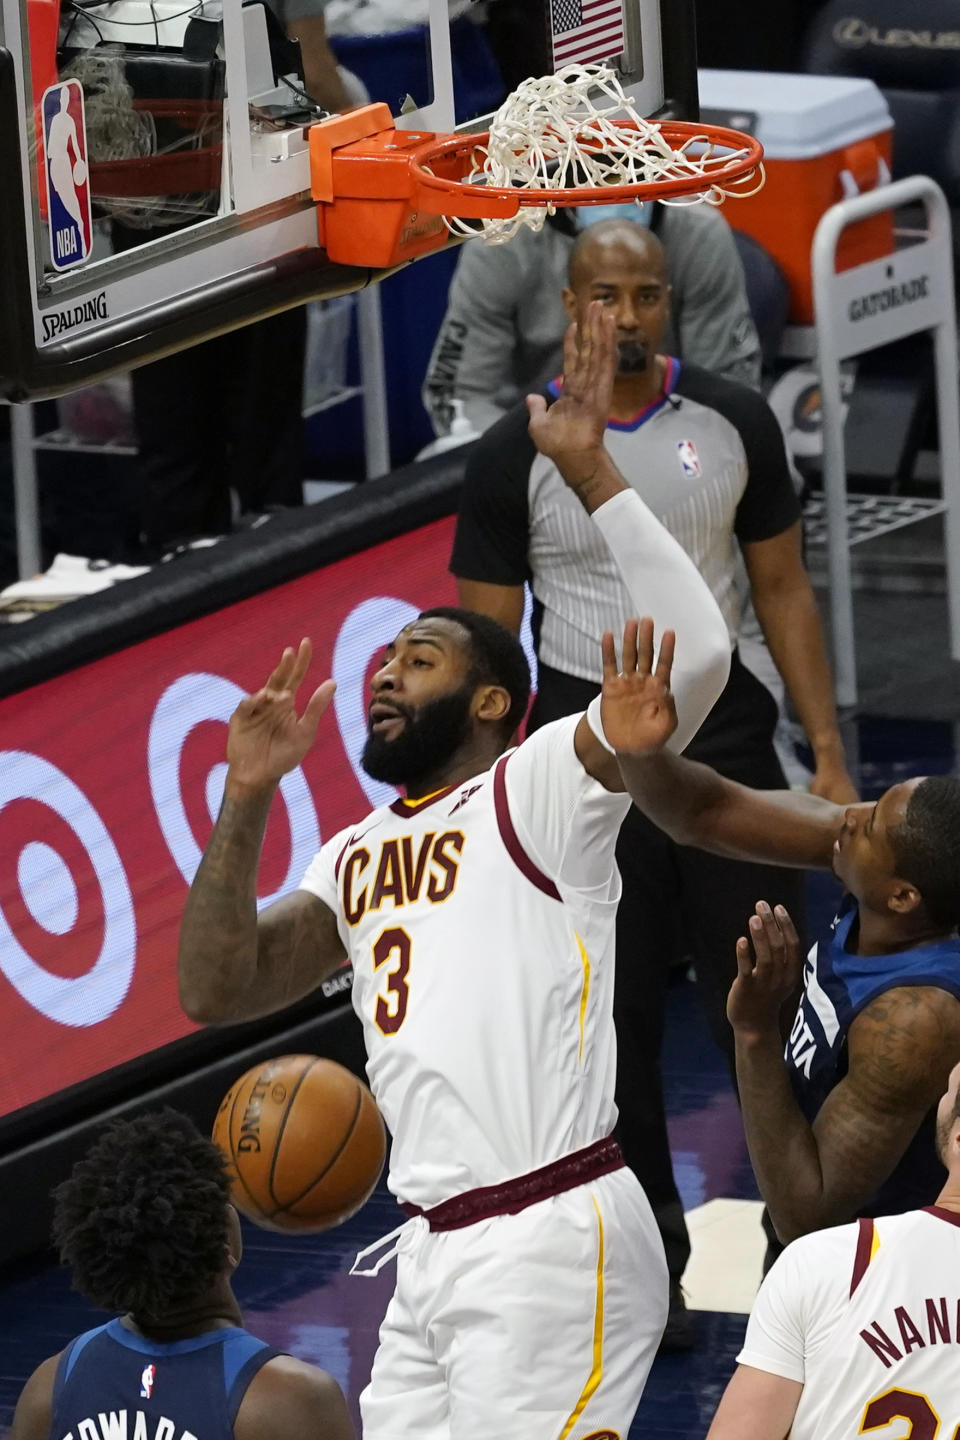 Cleveland Cavaliers' Andre Drummond (3) dunks against the Minnesota Timberwolves in the first half of an NBA basketball game Sunday, Jan. 31, 2021, in Minneapolis. (AP Photo/Jim Mone)